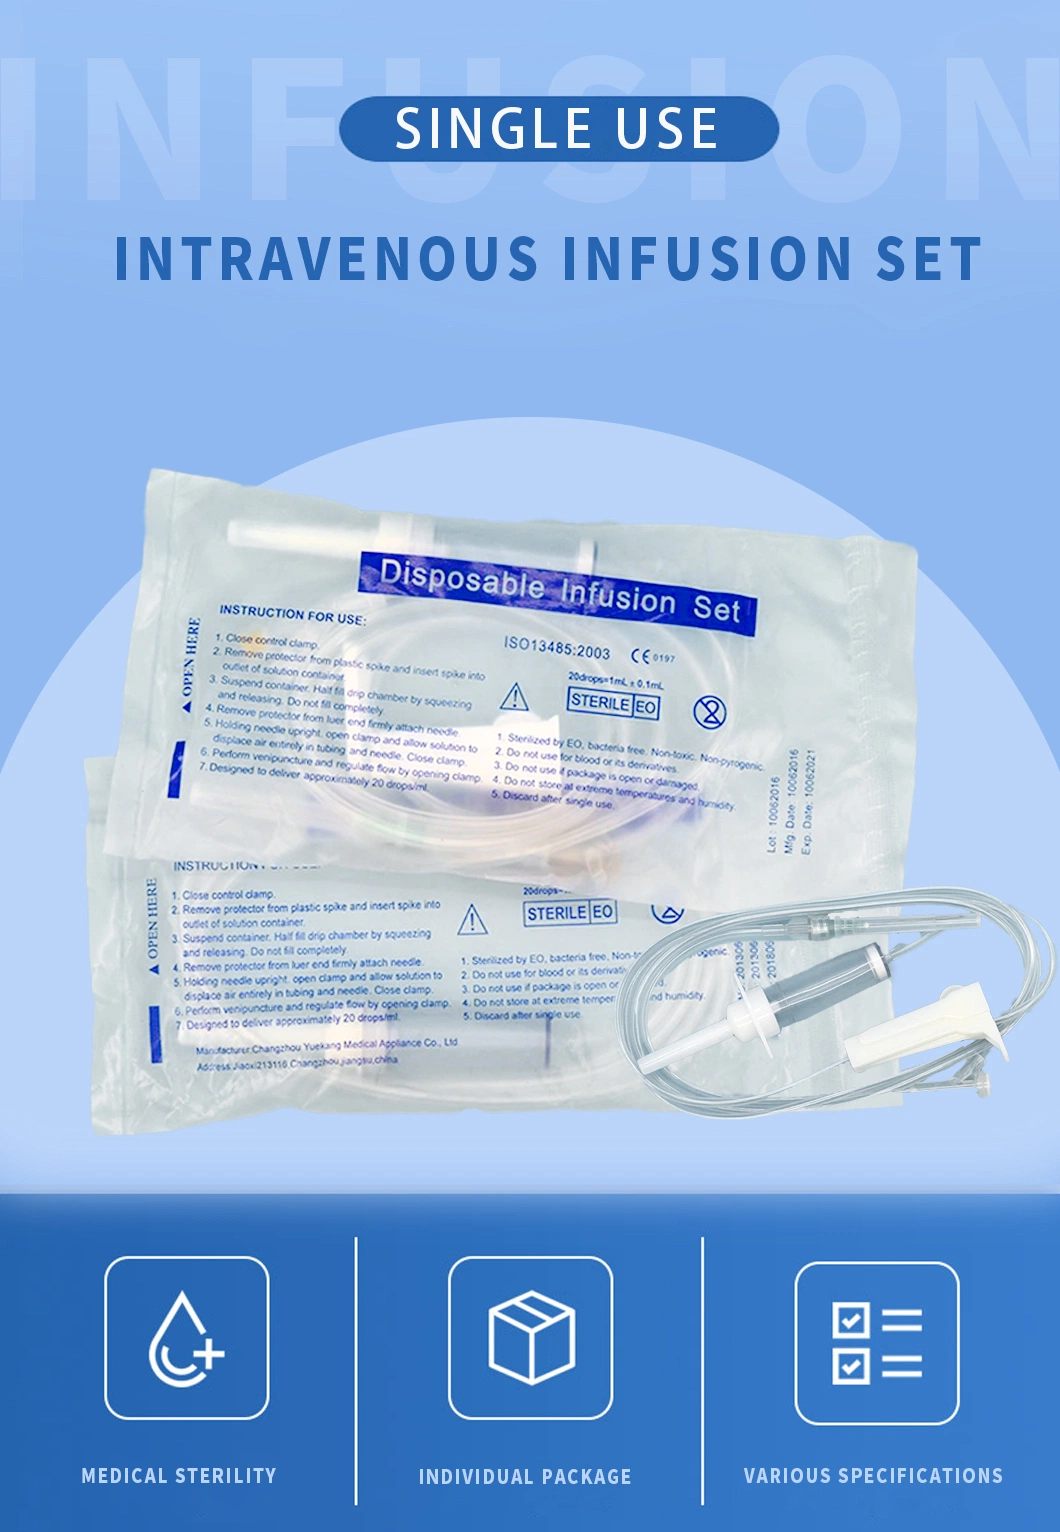 Inexpensive Medical Burette Disposable IV Infusion Set and Components with Filters